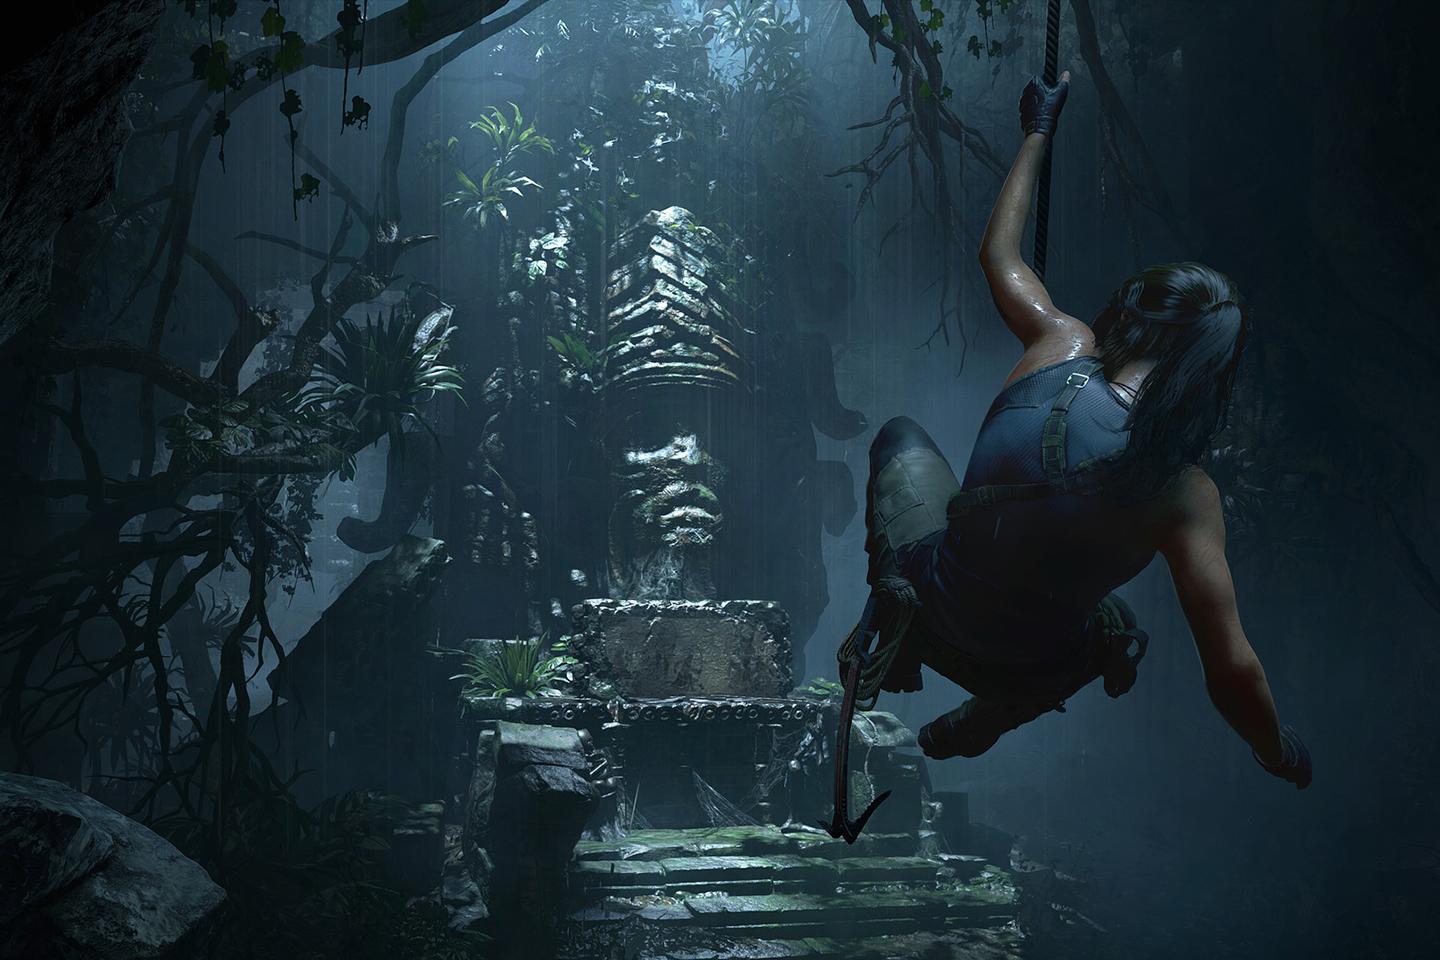 Lara wearing exploring gear dangles from a rope, descending toward an ancient temple ruin in a lush jungle.